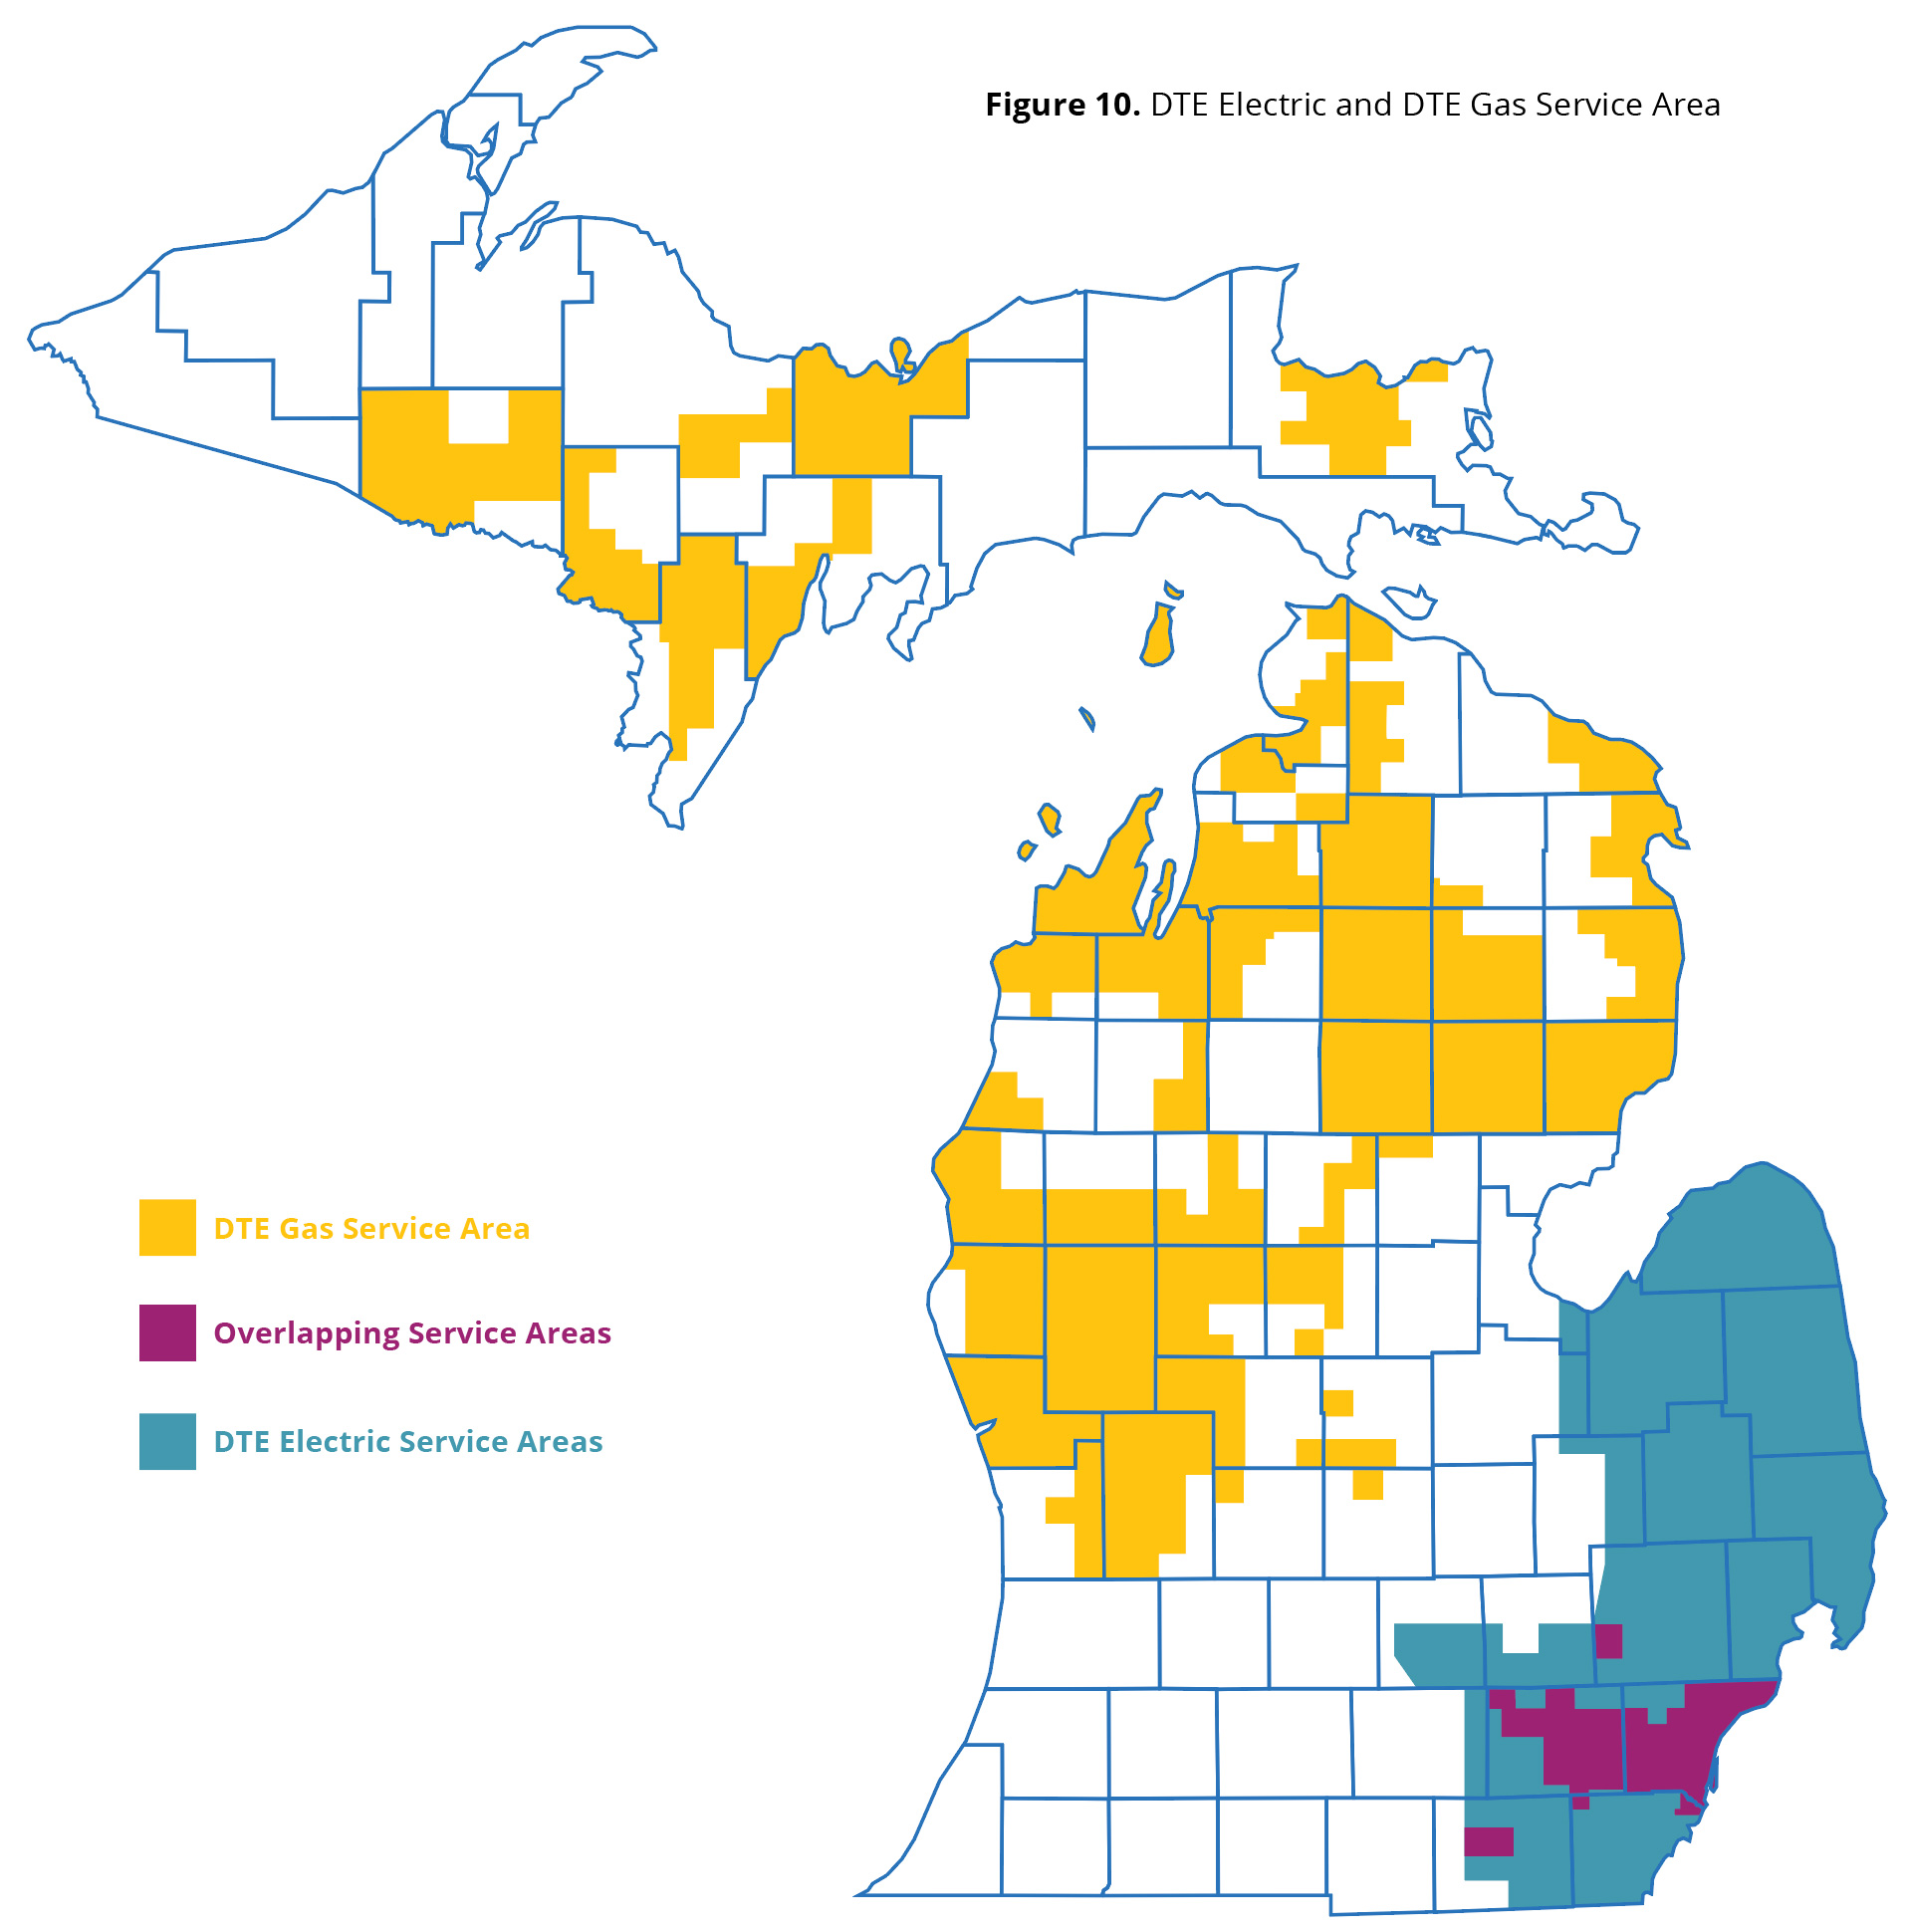 dte-energy-electricity-in-michigan-a-primer-mackinac-center